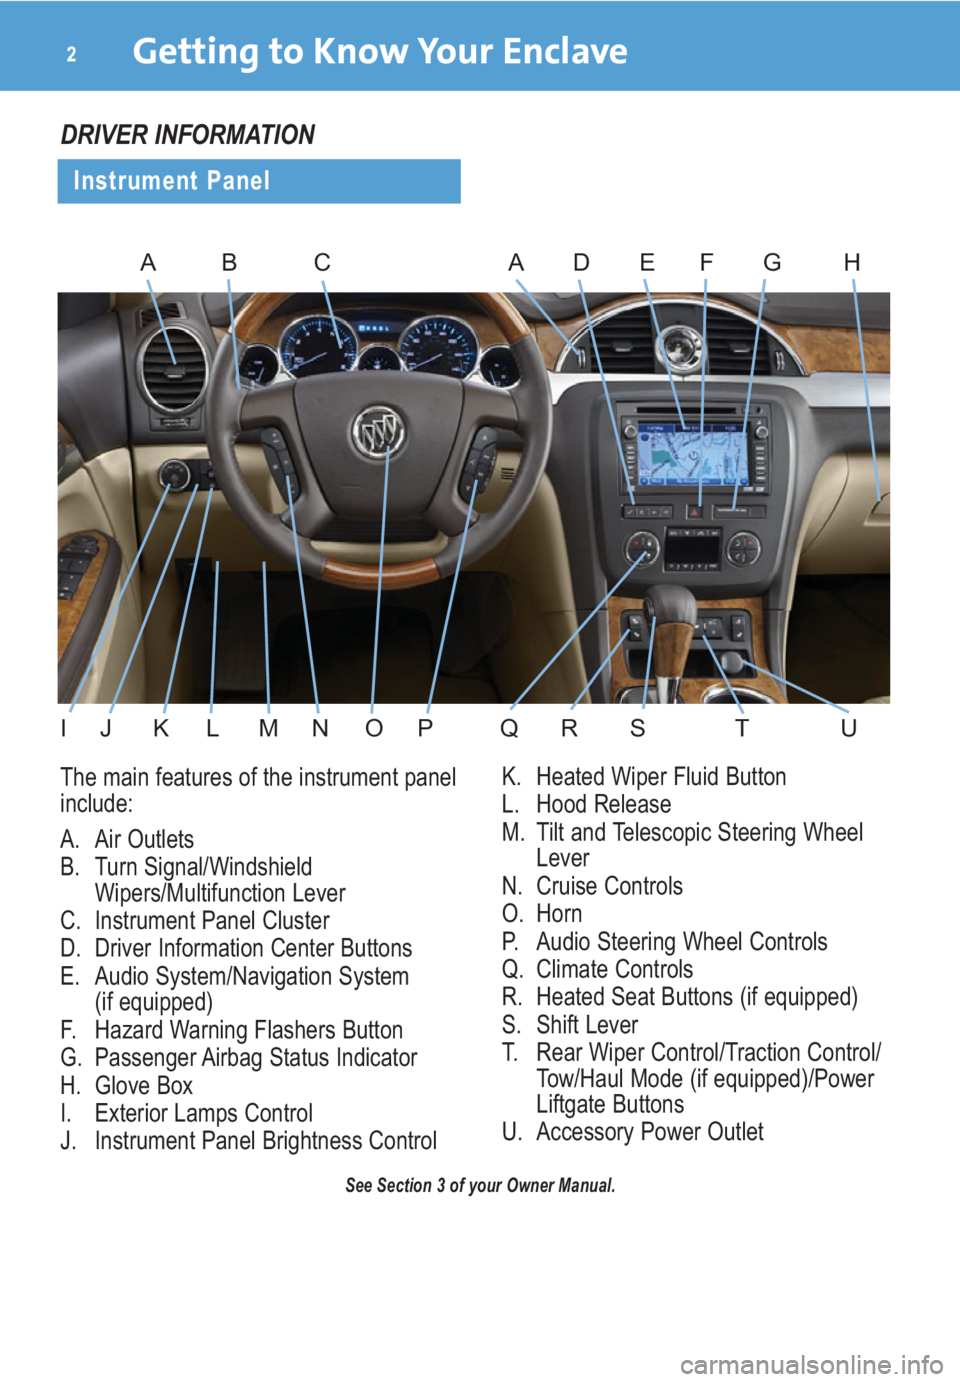 BUICK ENCLAVE 2009  Get To Know Guide DRIVER INFORMATION
Getting to Know Your Enclave2
Instrument Panel
See Section 3 of your Owner Manual.
ABACDE
IJNUSKLMOPQRT
F
The main features of the instrument panel
include:
A. Air Outlets
B. Turn S